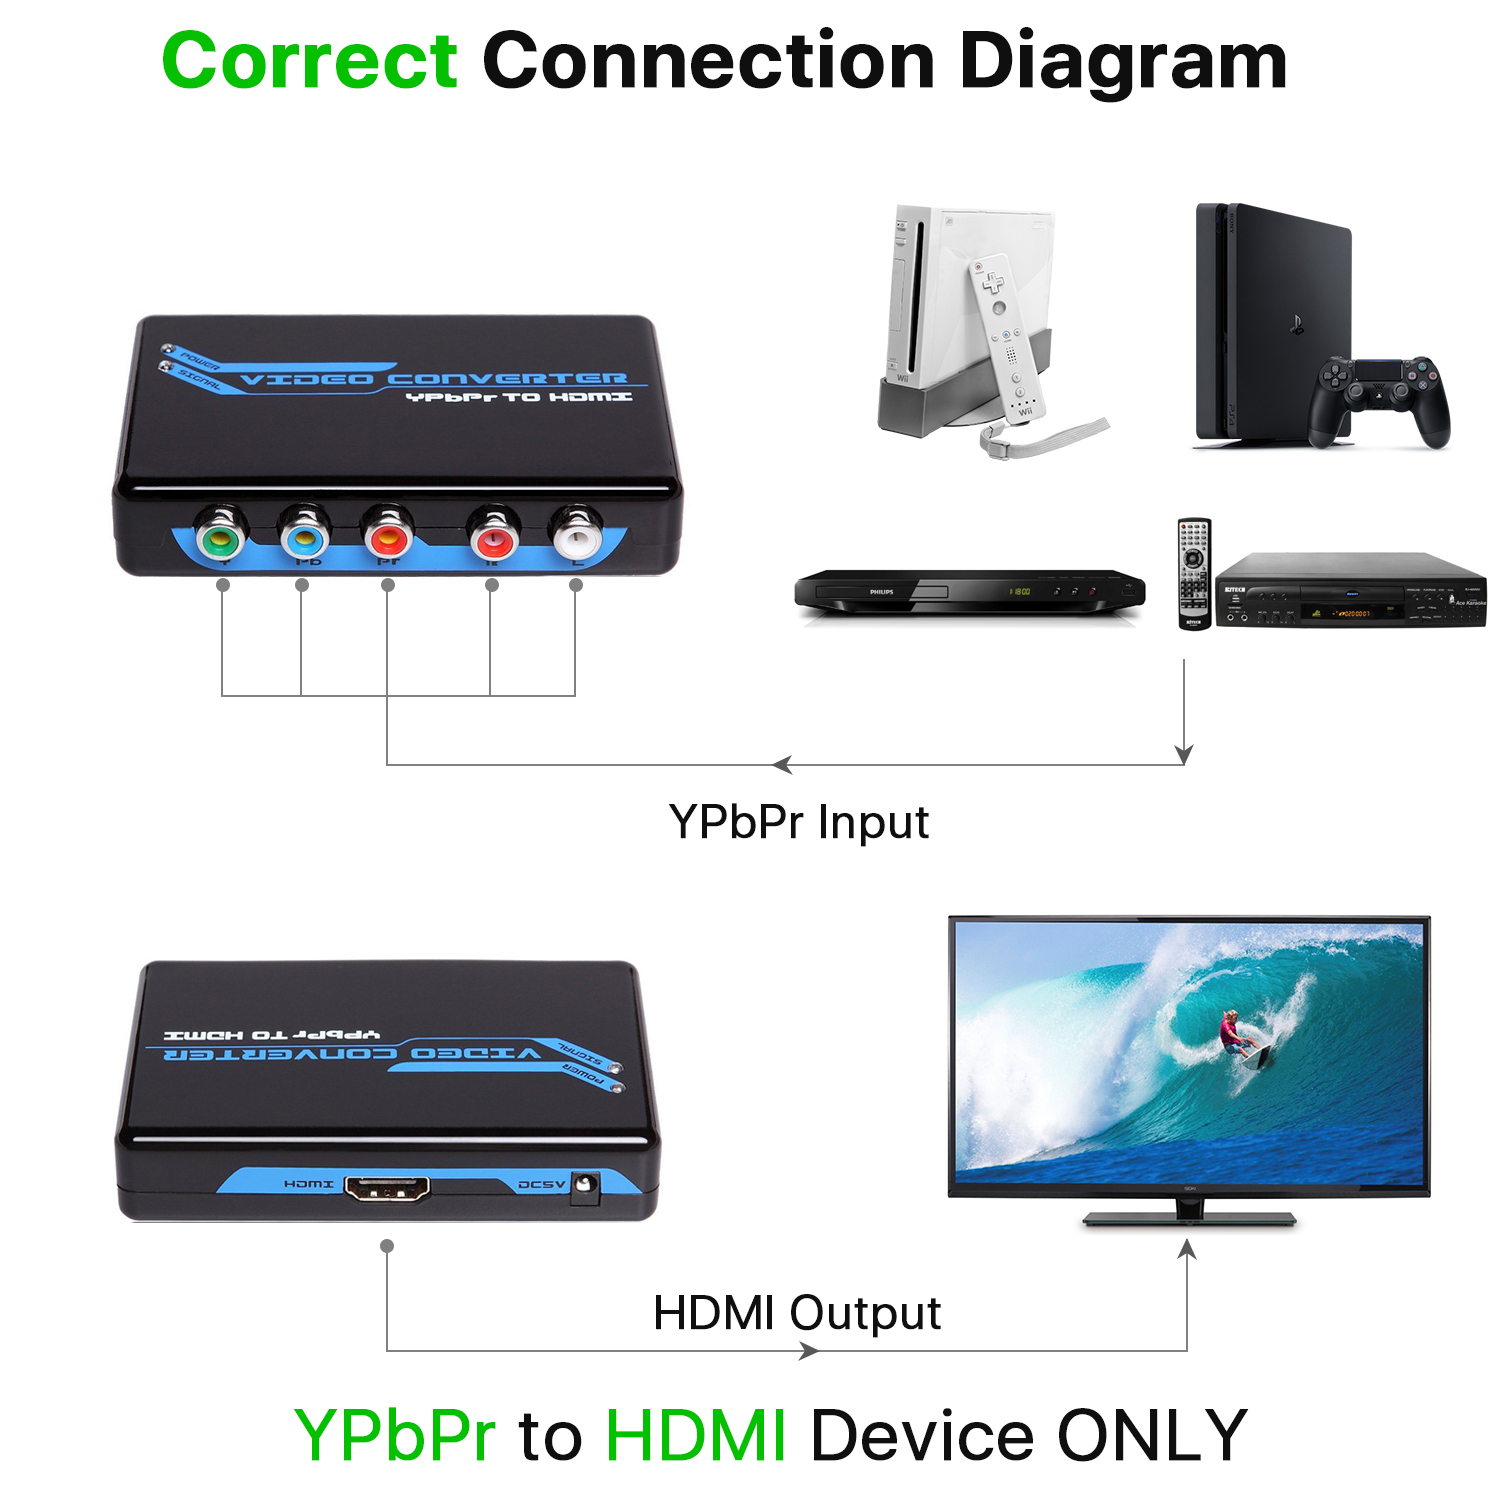 The component video (YPbPr) to HDMI converter allows older analog devices to be integrated seamlessly into the modern home theater by transforming the Y PB PR video and audio signal into HDMI signal